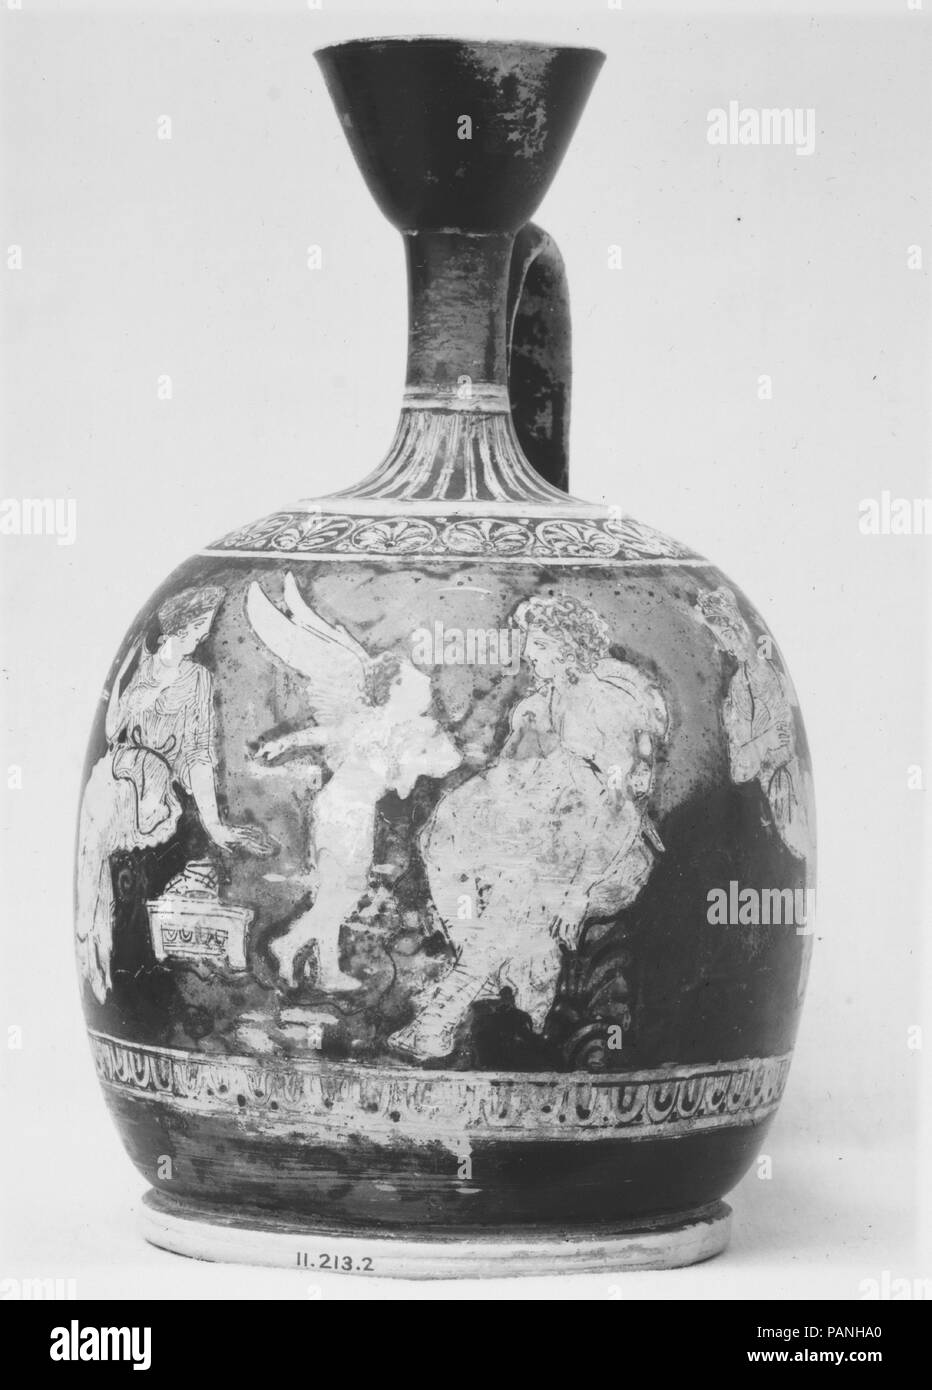 Terracotta squat lekythos (oil flask). Culture: Greek, Attic. Dimensions: H. 7 7/8 in. (20 cm)  diameter  4 3/4 in. (12.1 cm). Date: ca. 410 B.C..  The youth Chrysippos with Aphrodite, Eros, and Pompe  Chrysippos, wearing the boots, mantle, and broad-brimmed hat of a traveler, talks with Eros who points toward Aphrodite. Next to the goddess stands a casket, on it a pair of shoes. The woman to the left is unidentified, the other one is Pompe (the personification of procession). Beside her are traces of a ritual basket that would have been depicted in applied clay with gilding. The details of th Stock Photo